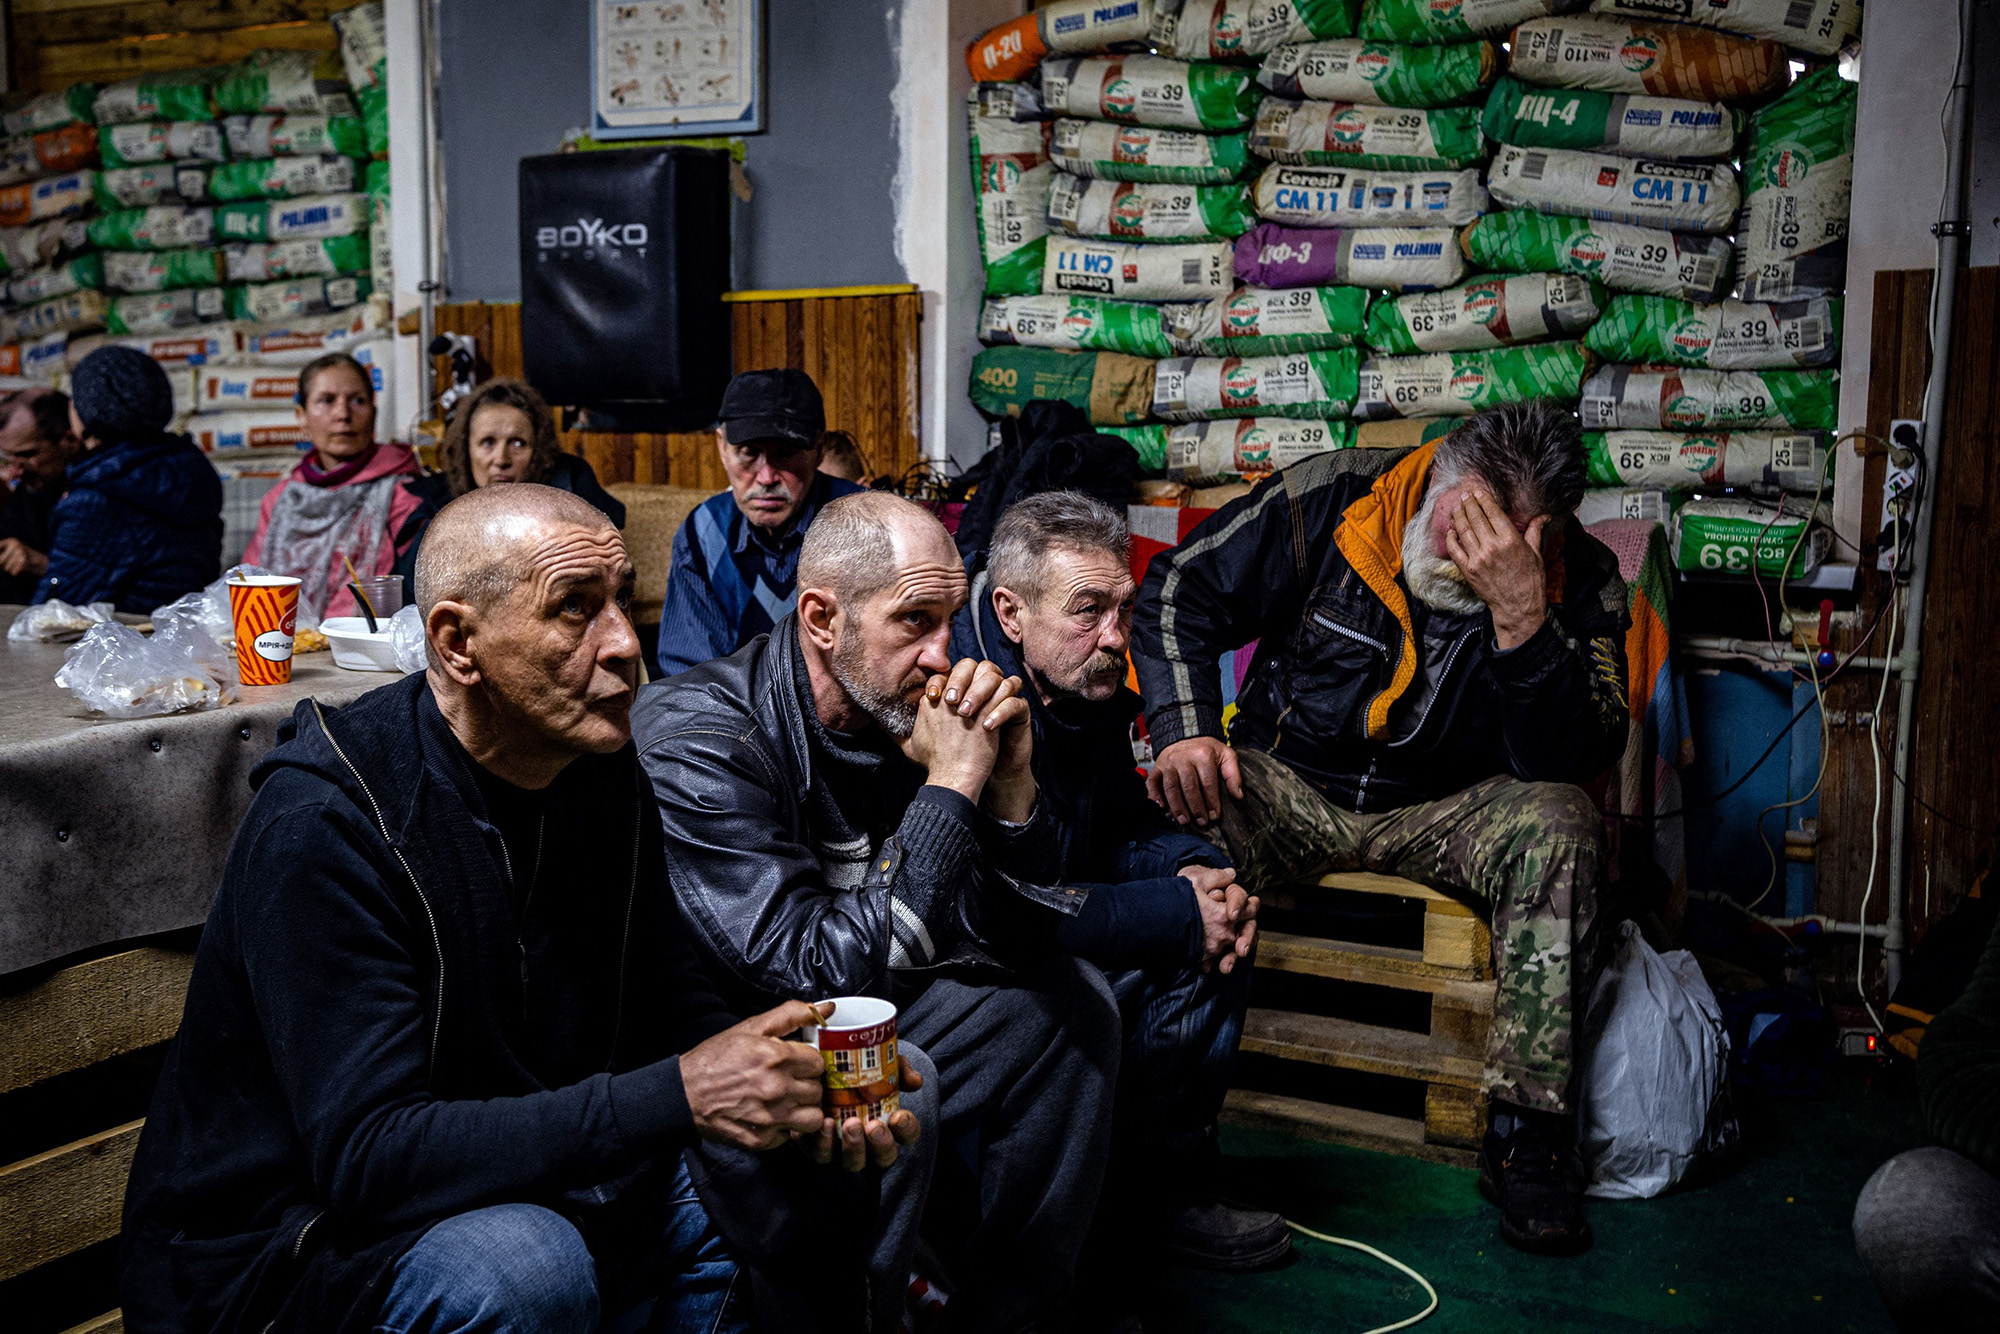 Ukrainians watch a movie on TV at a humanitarian aid centre in Bakhmut, Ukraine, on February 27.